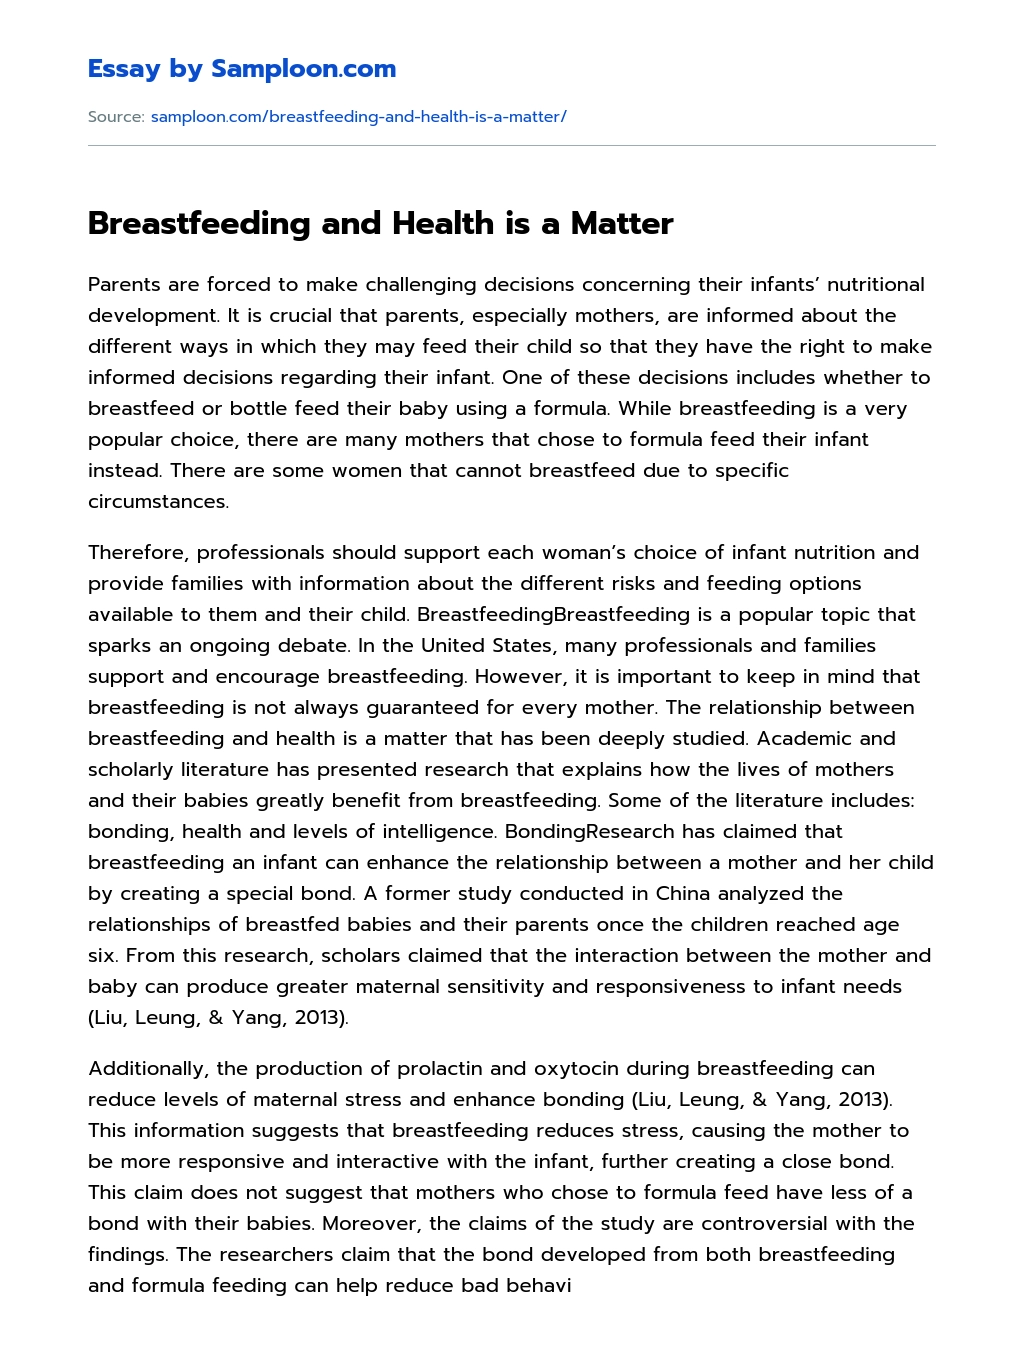 Breastfeeding and Health is a Matter essay